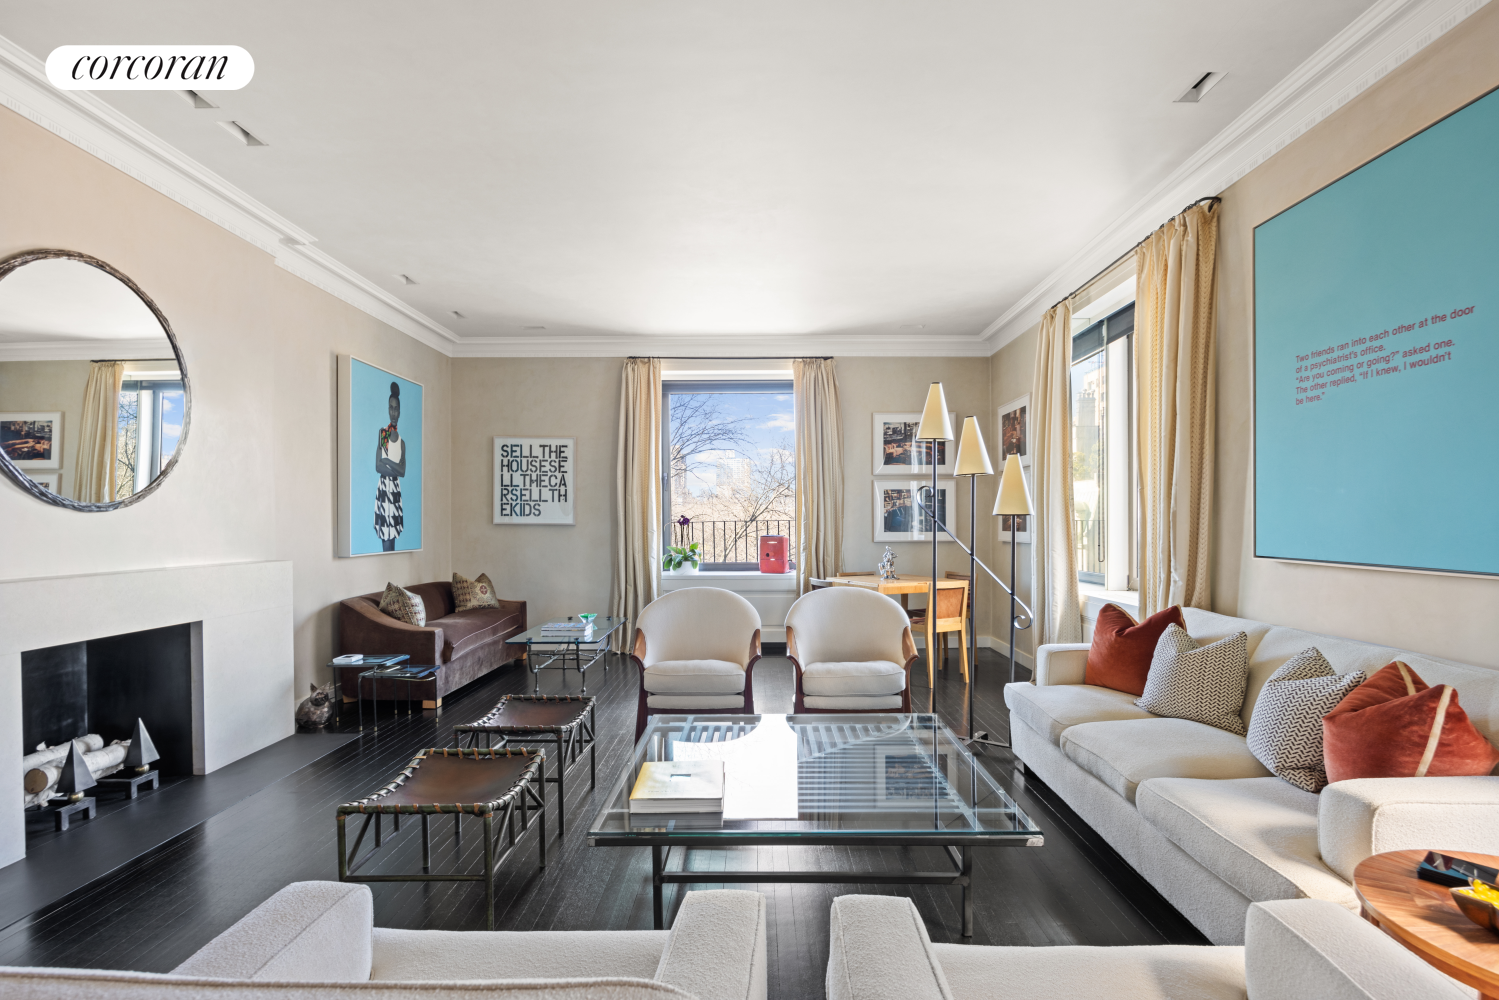 920 5th Avenue 5A, Lenox Hill, Upper East Side, NYC - 3 Bedrooms  
4.5 Bathrooms  
9 Rooms - 